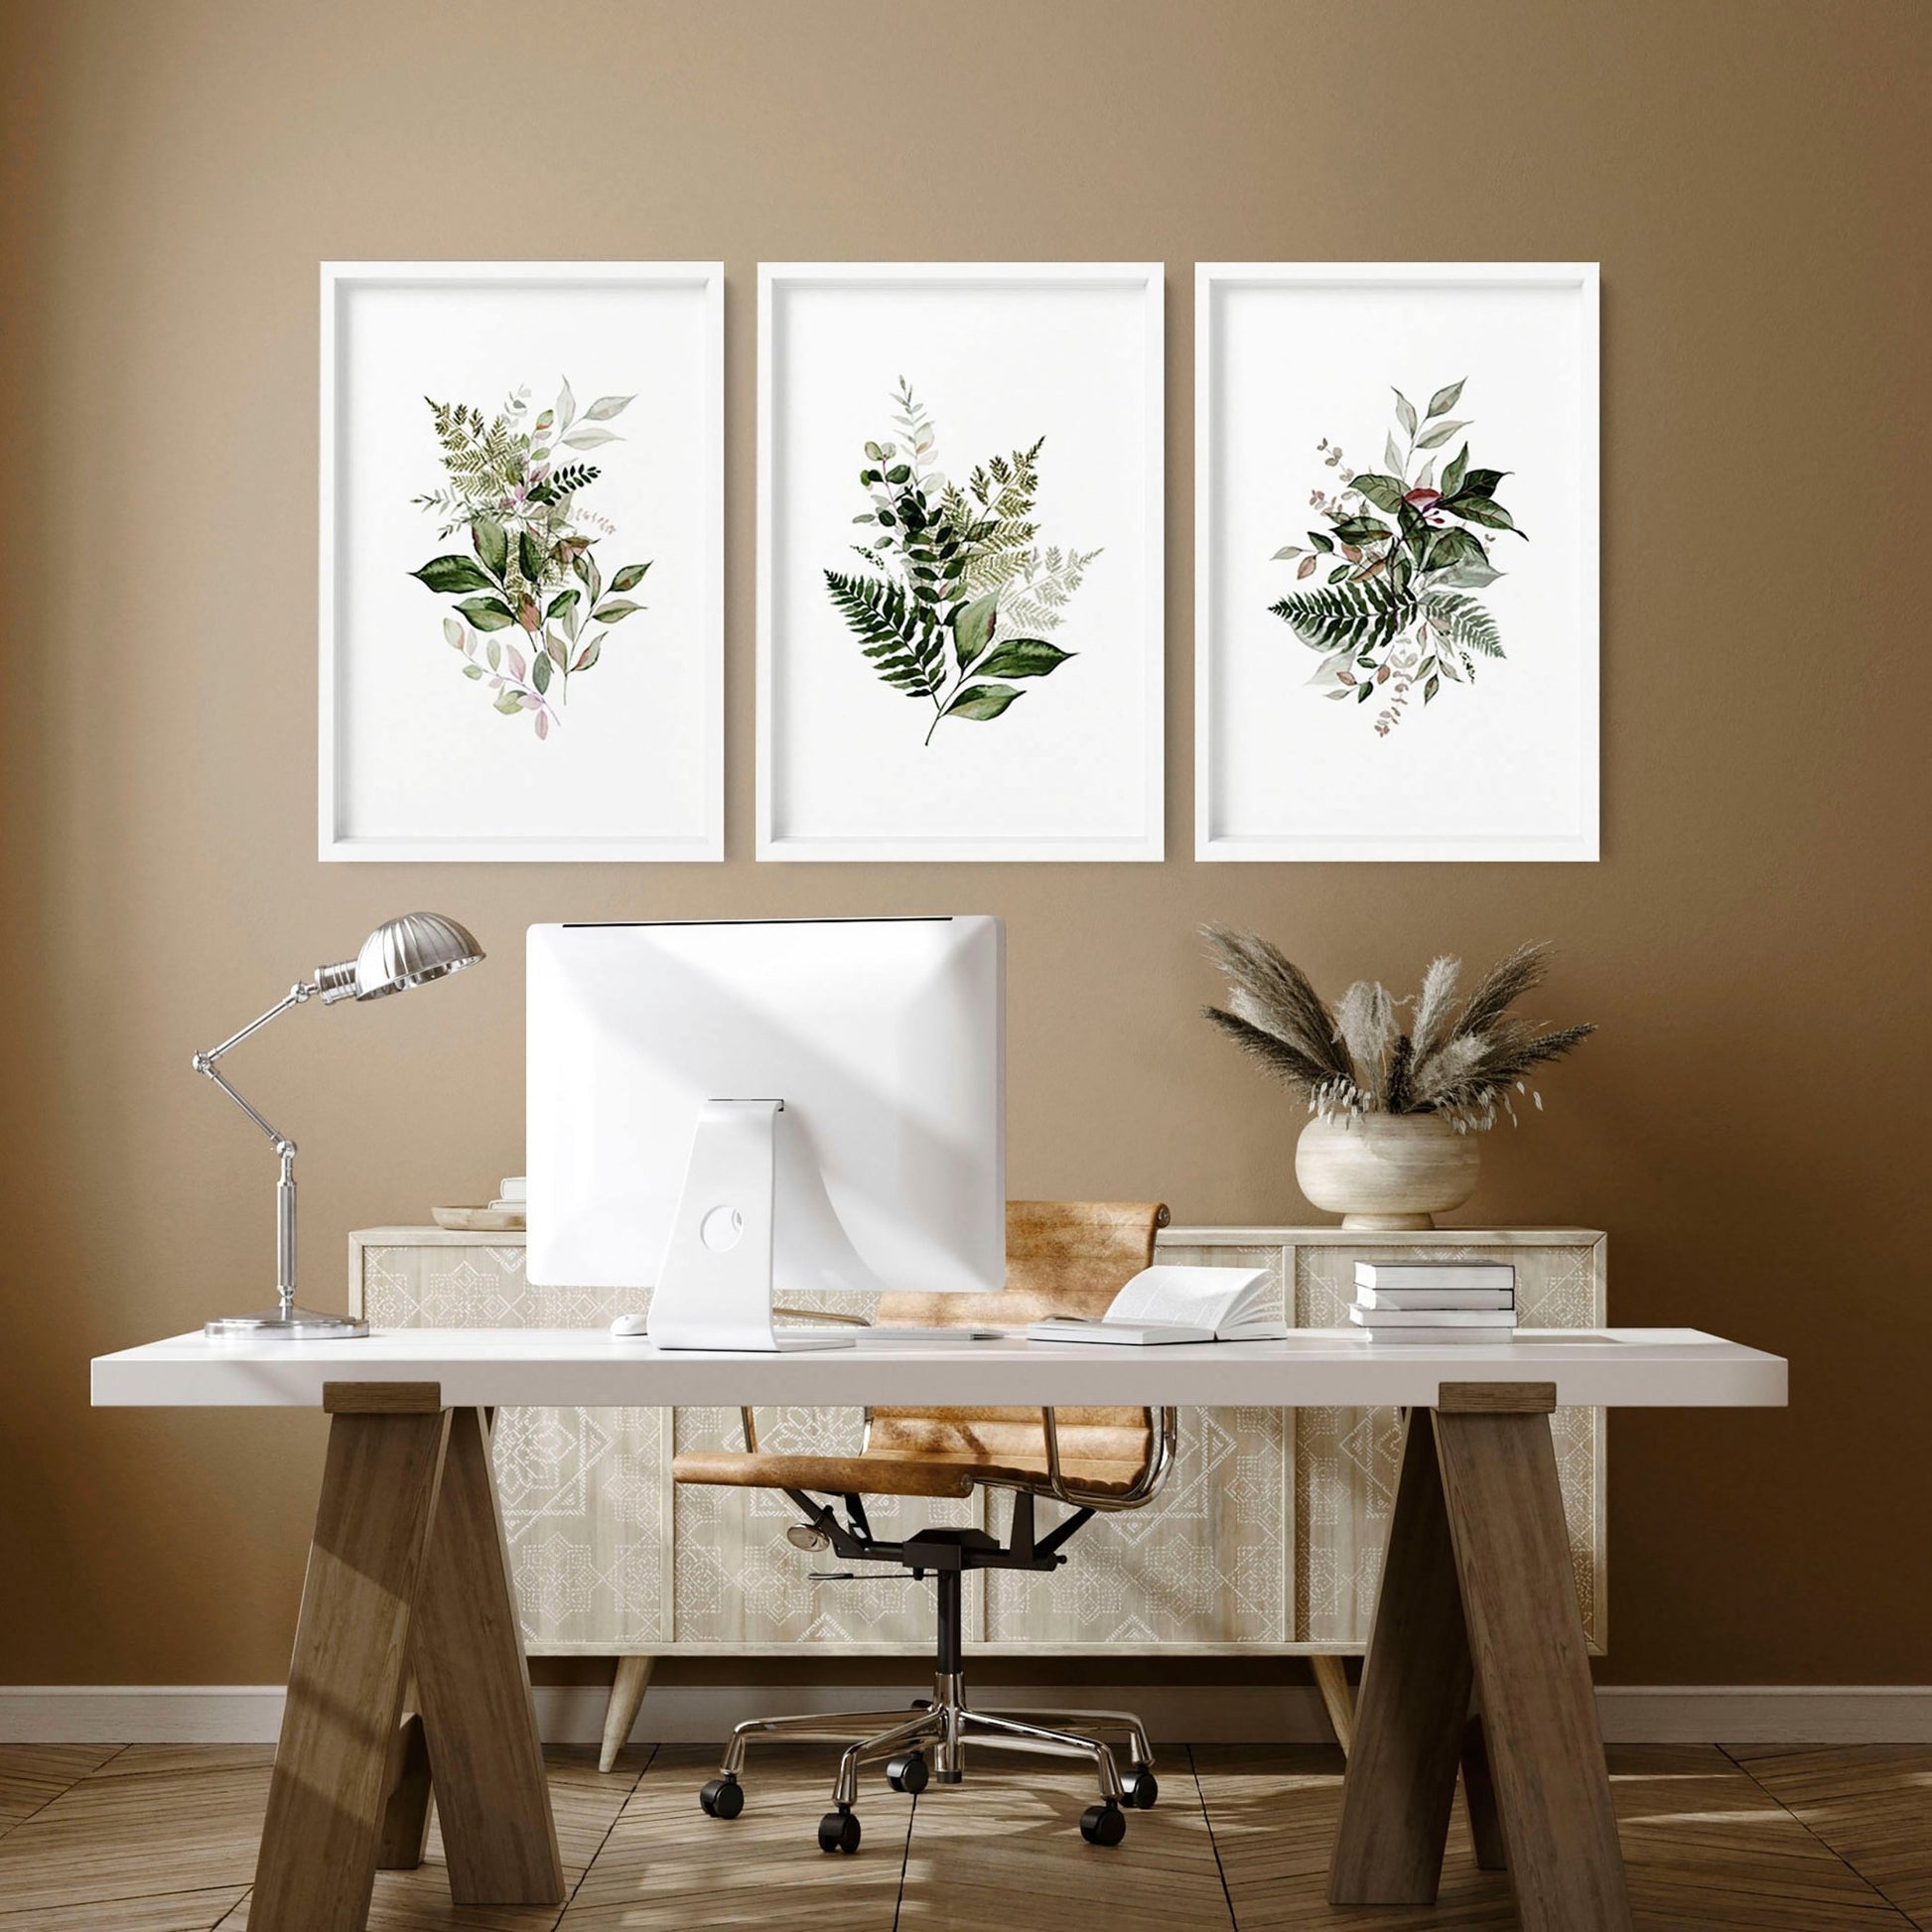 Wall decorations for office | set of 3 framed wall art